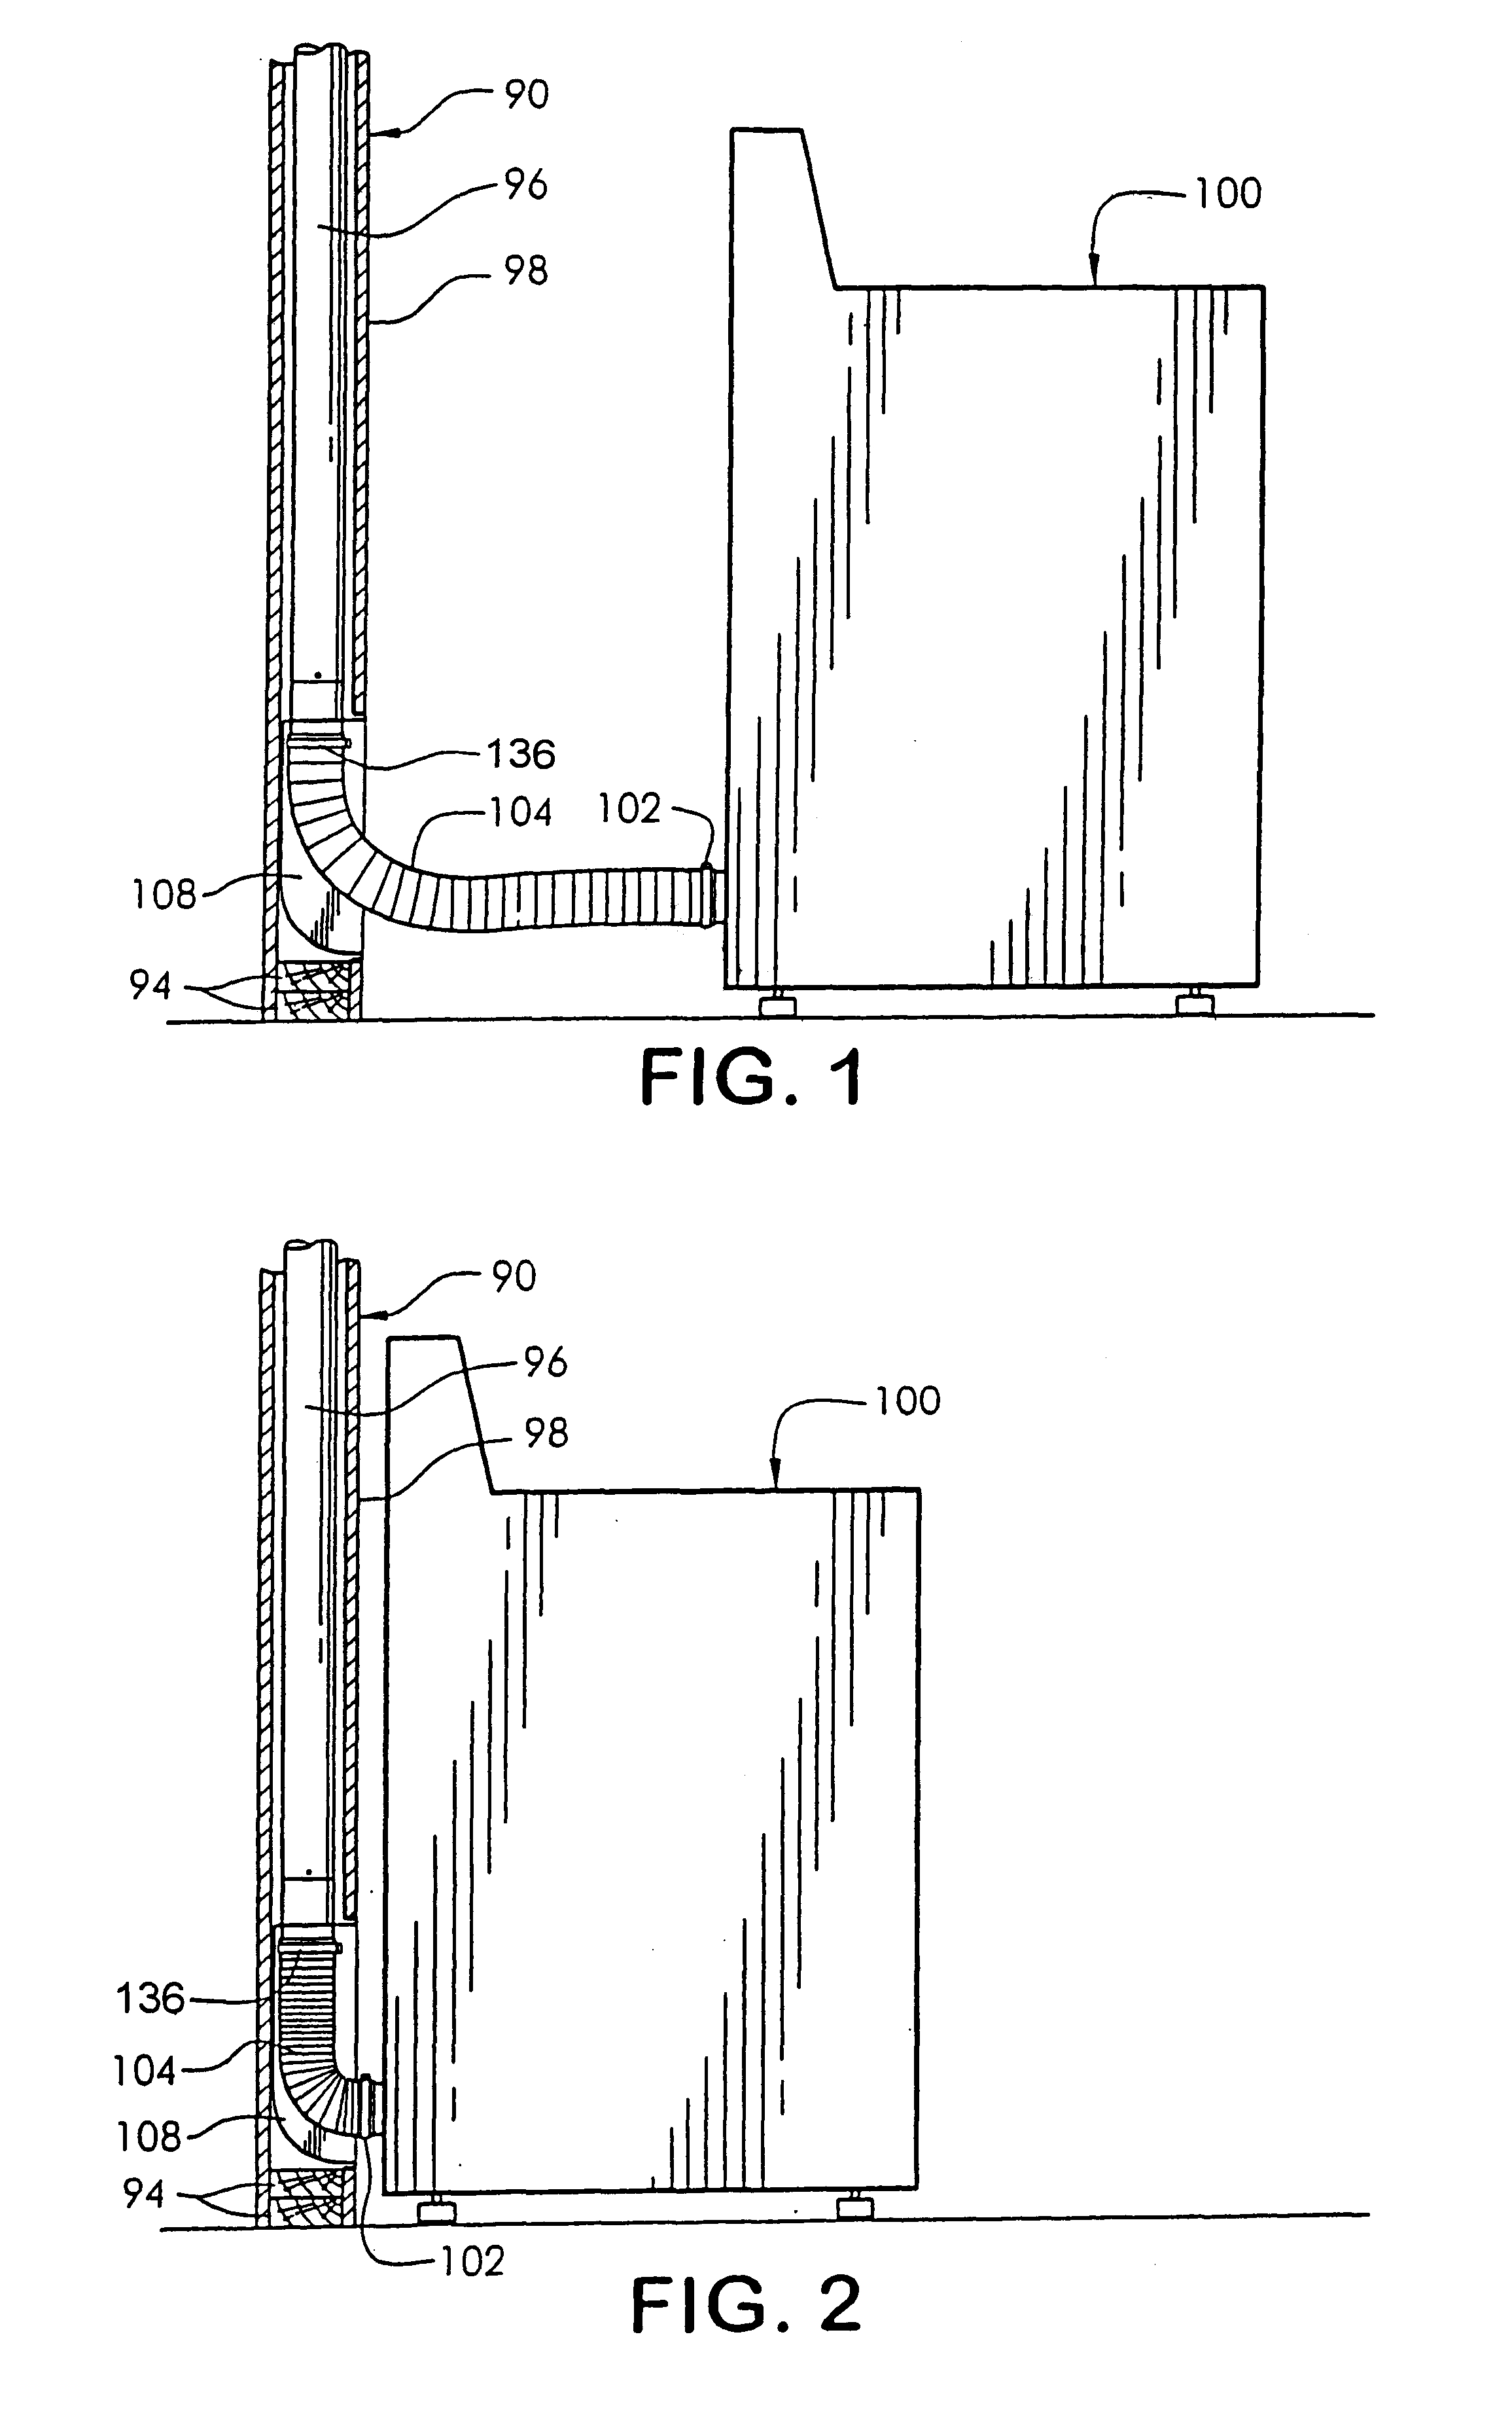 System and method for a dryer rough-in box with contoured vent receptacle and formed grommet